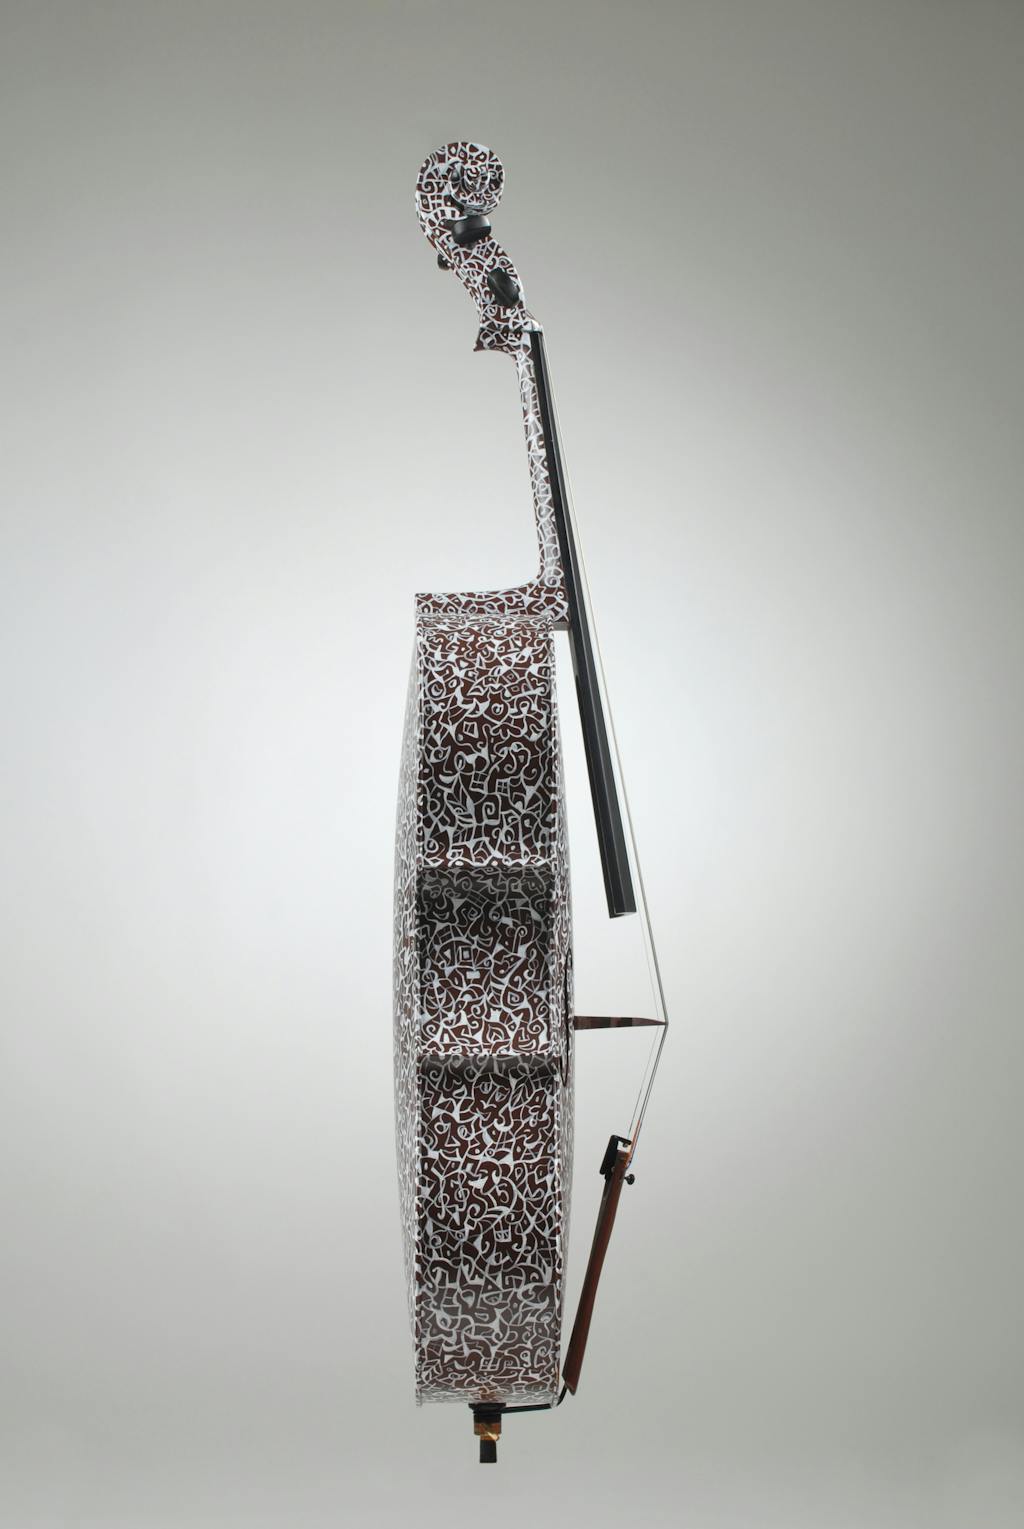 Cello "Boléro", painted by Elena Birkenwald in 2000